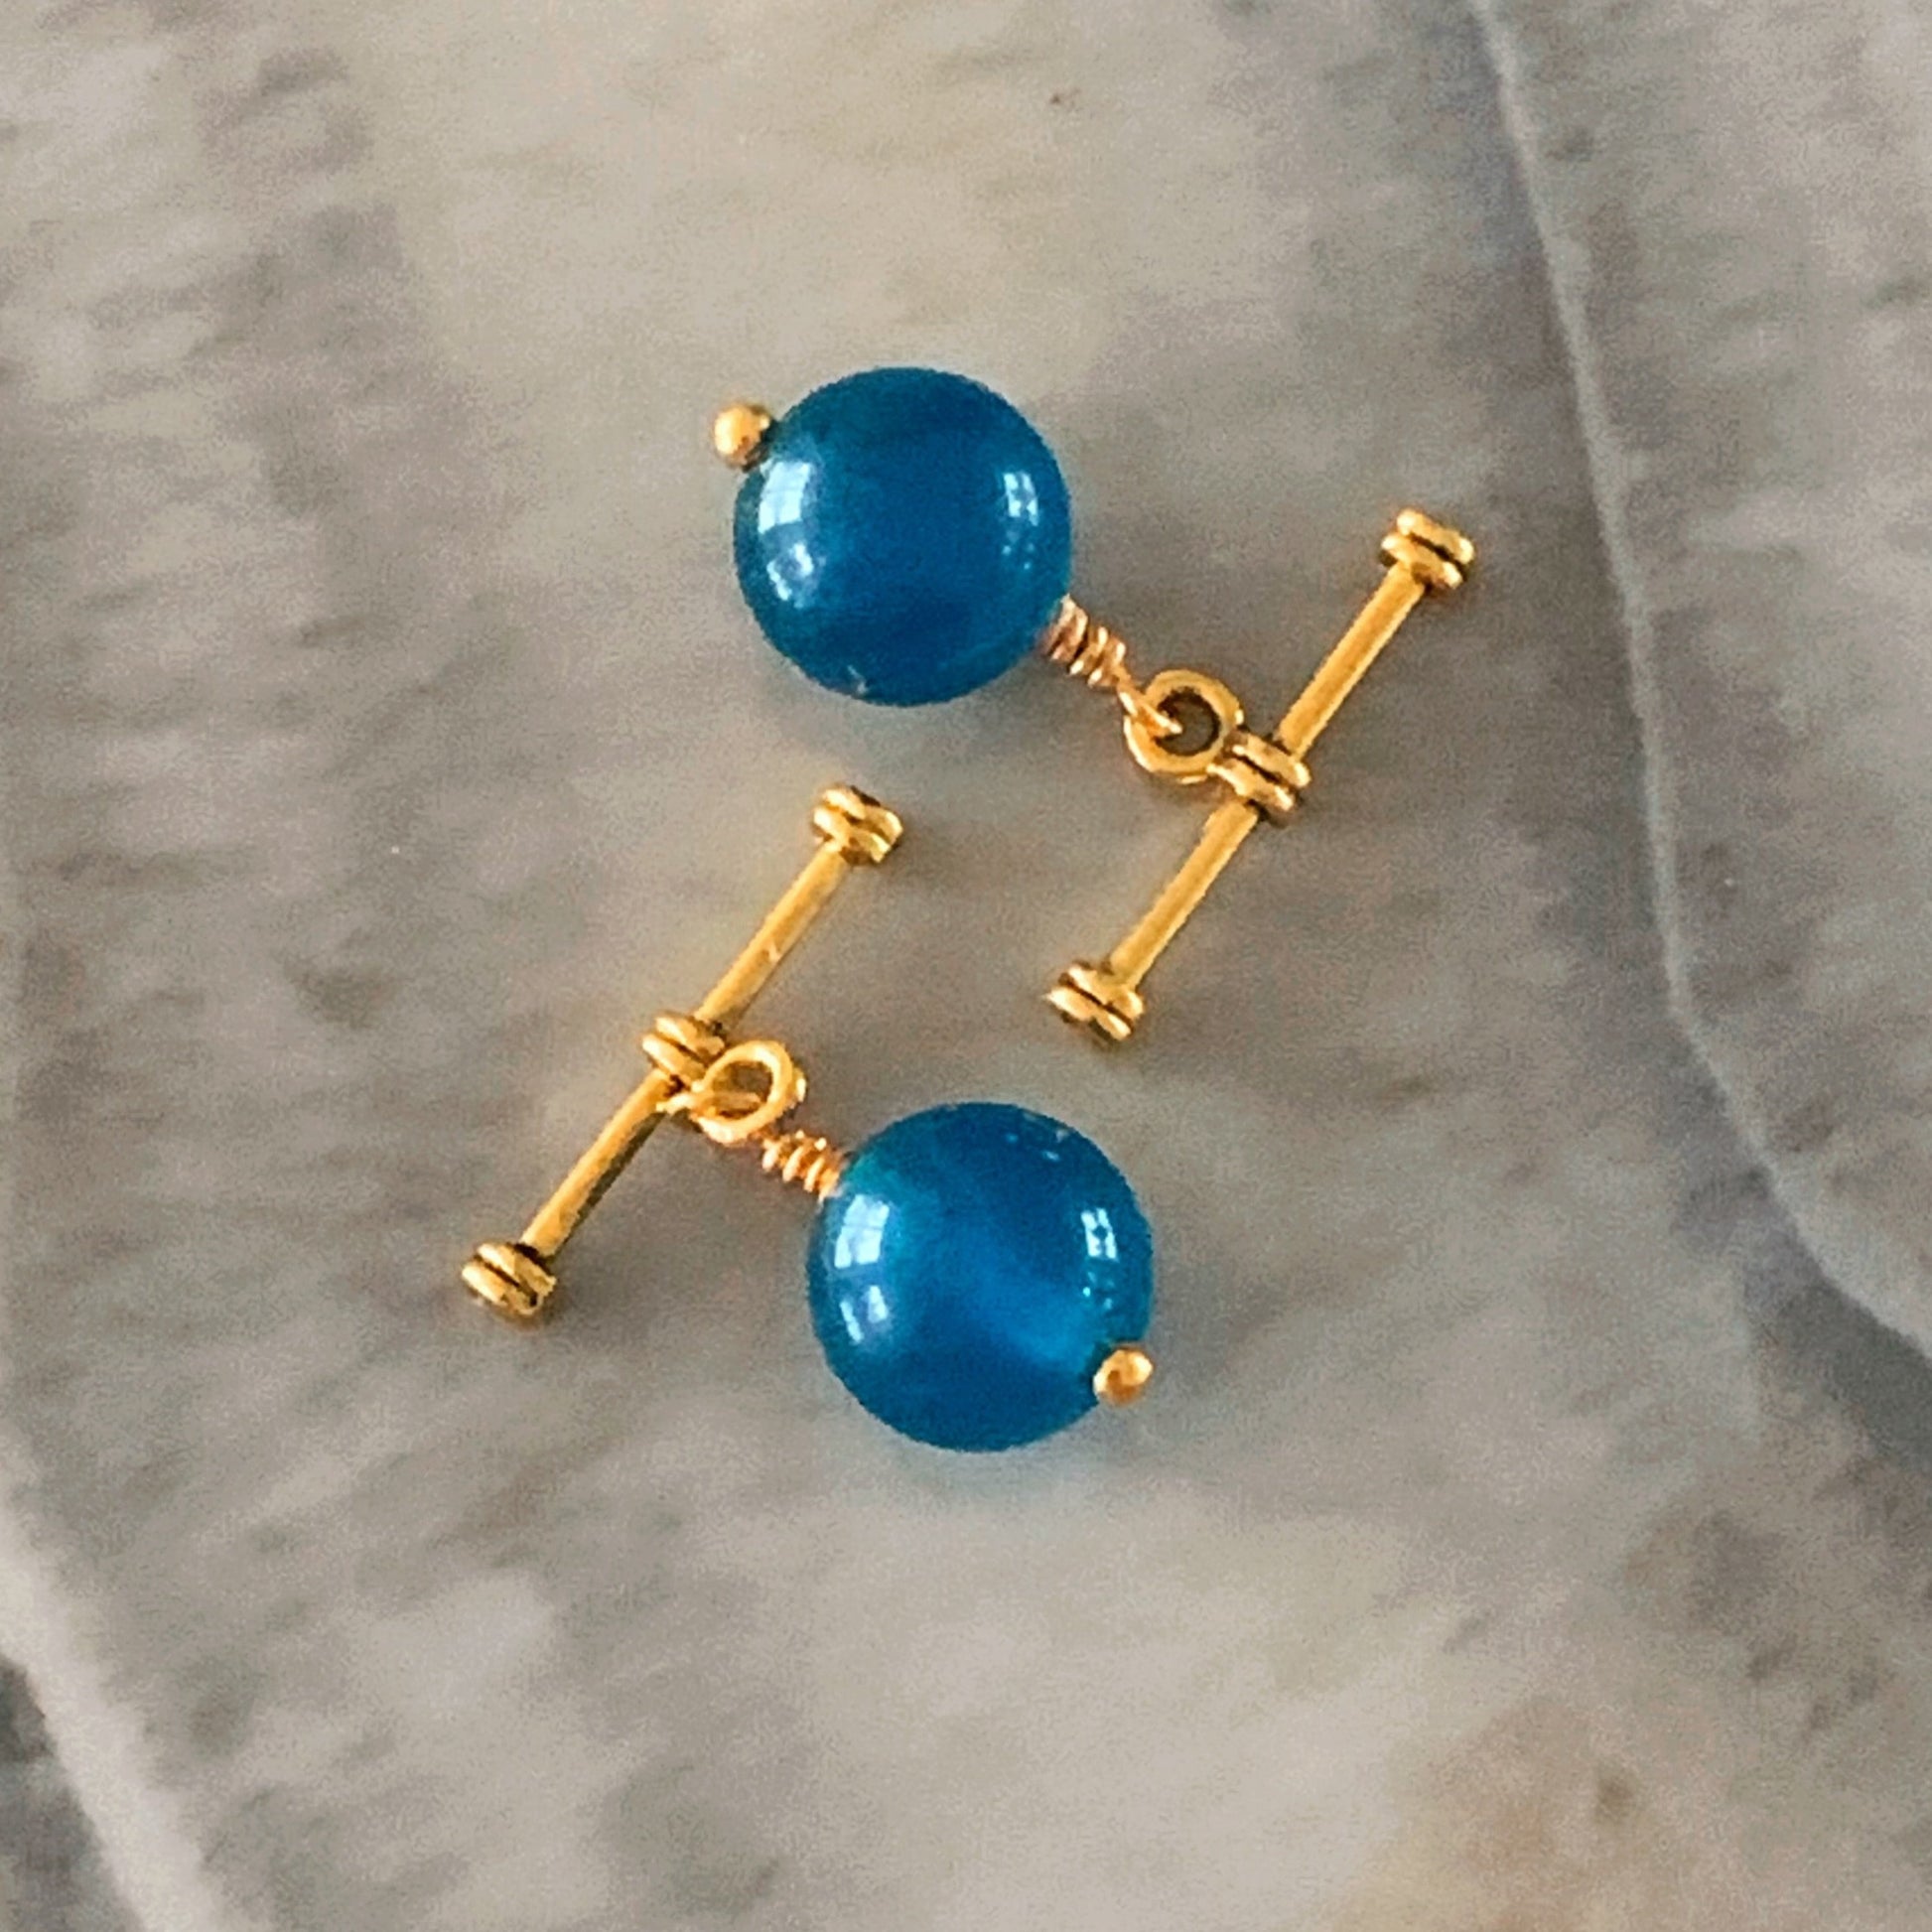 Vivid Blue Apatite cufflinks, cuff links with gold toggles